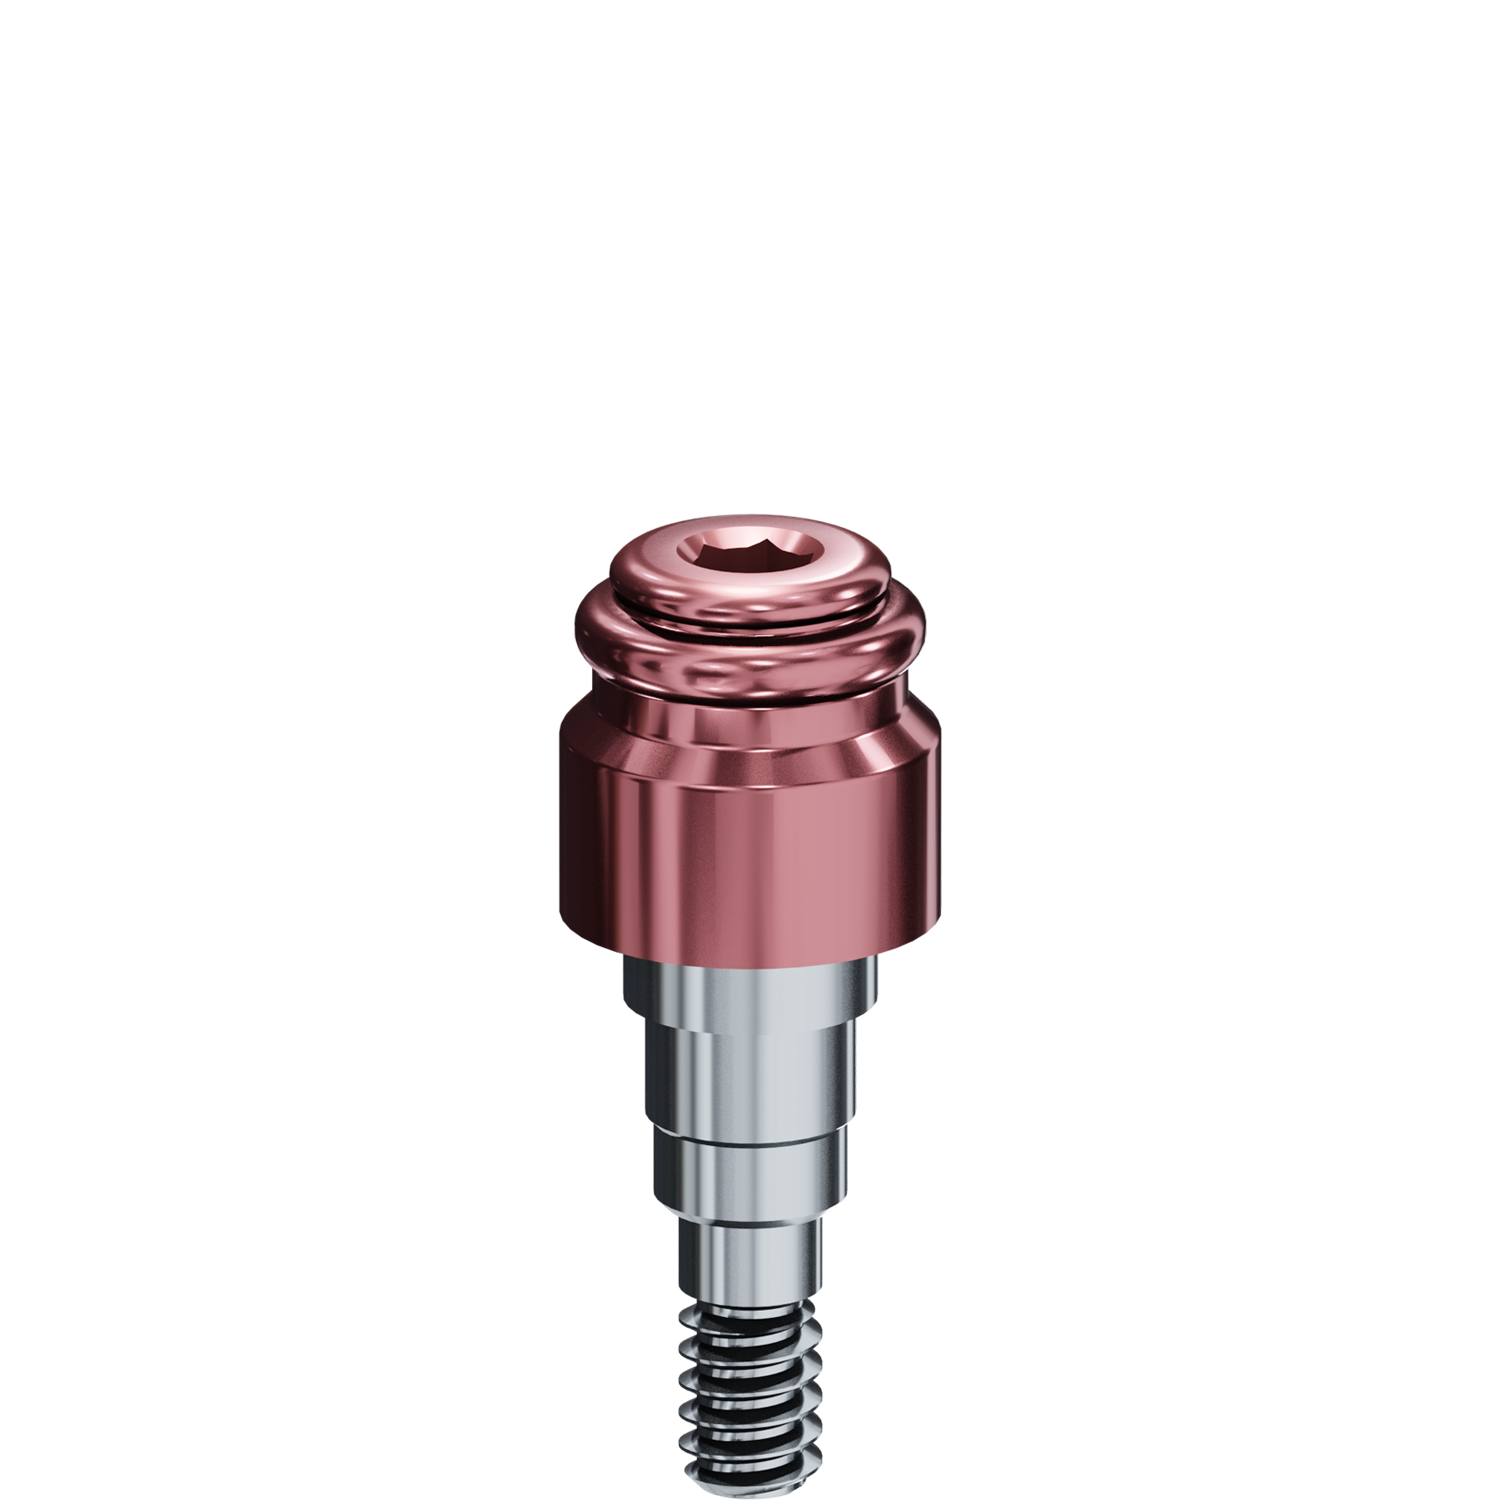 R-Tx Attachment System - Biomet 3i® - 4.1mm Certain Connection - 0.048" Drive - 5.0mm